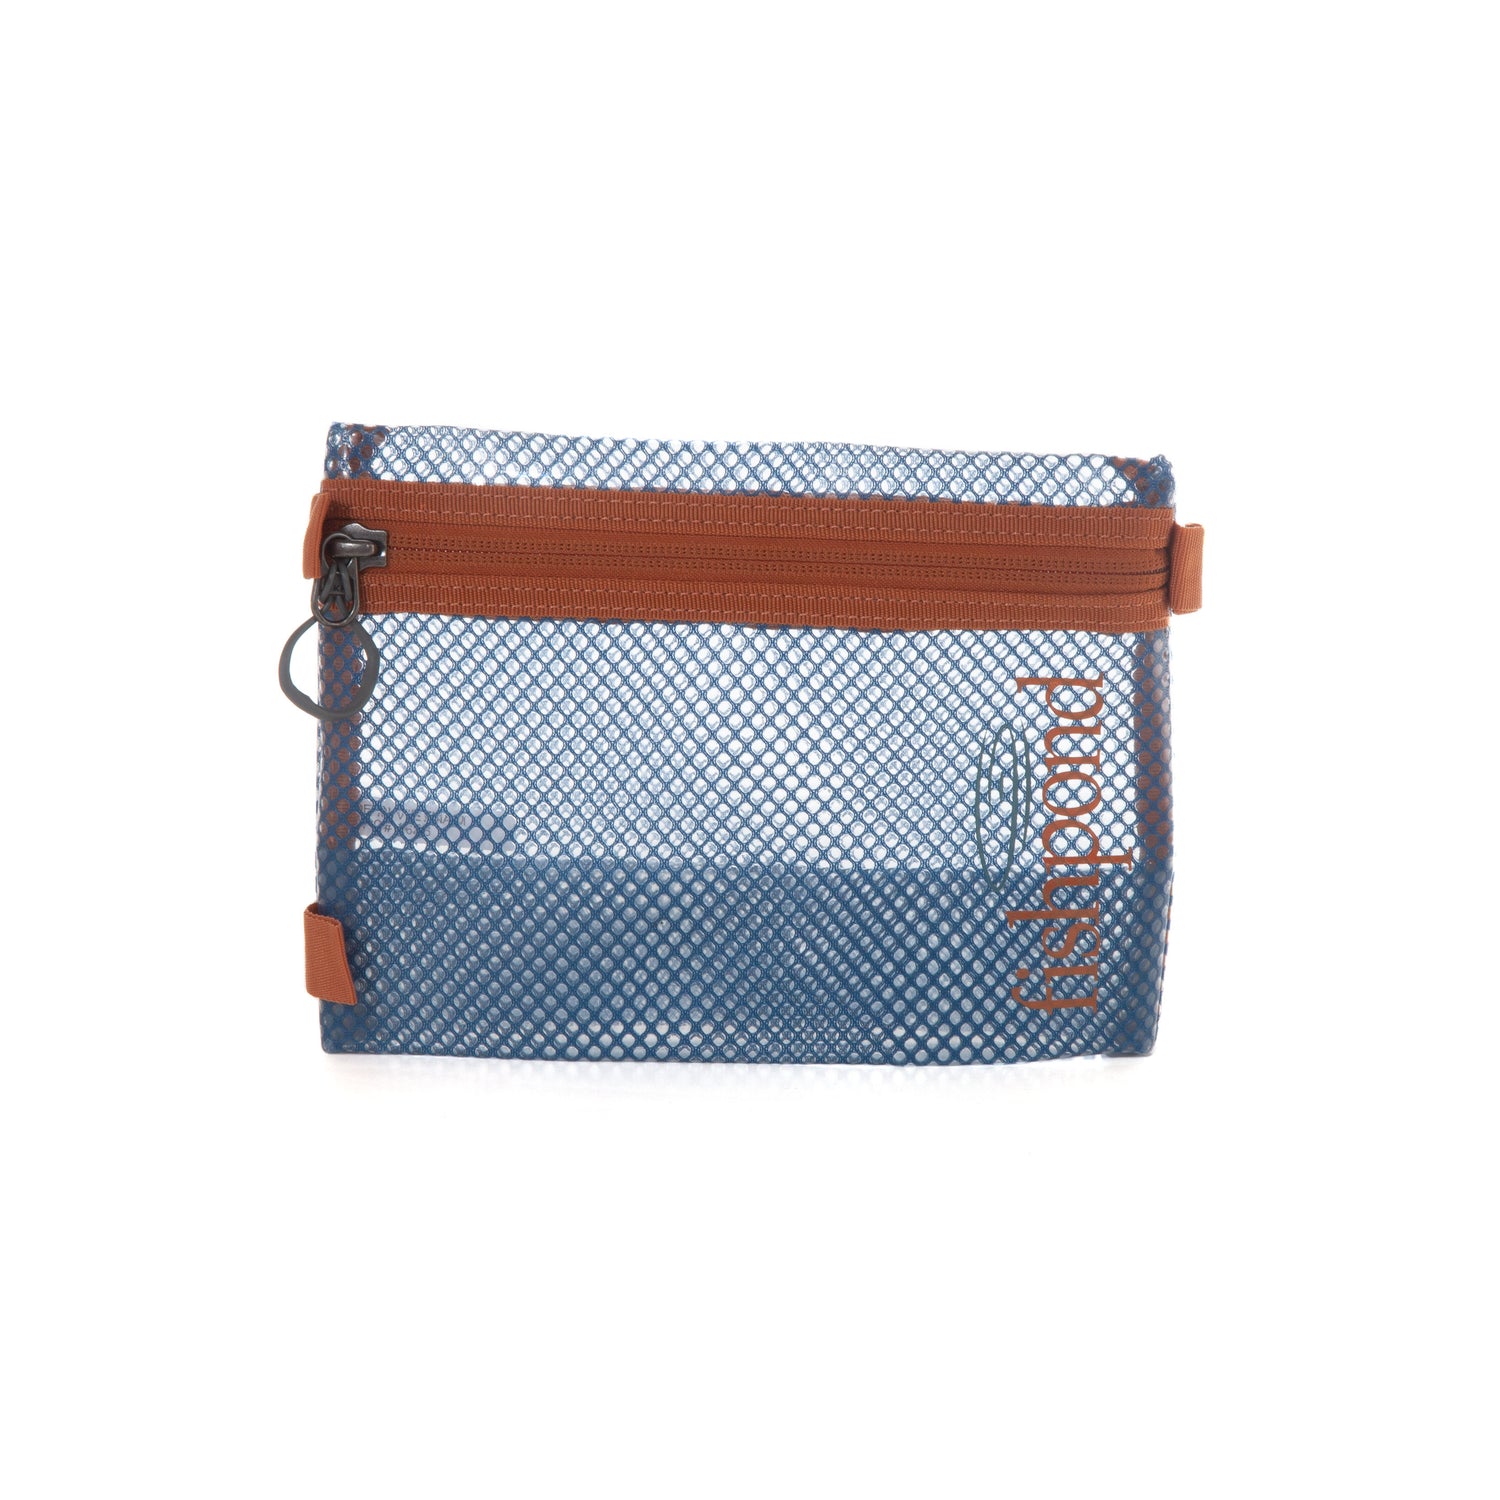 Green River Gear Bag  Fly Fishing – Fishpond